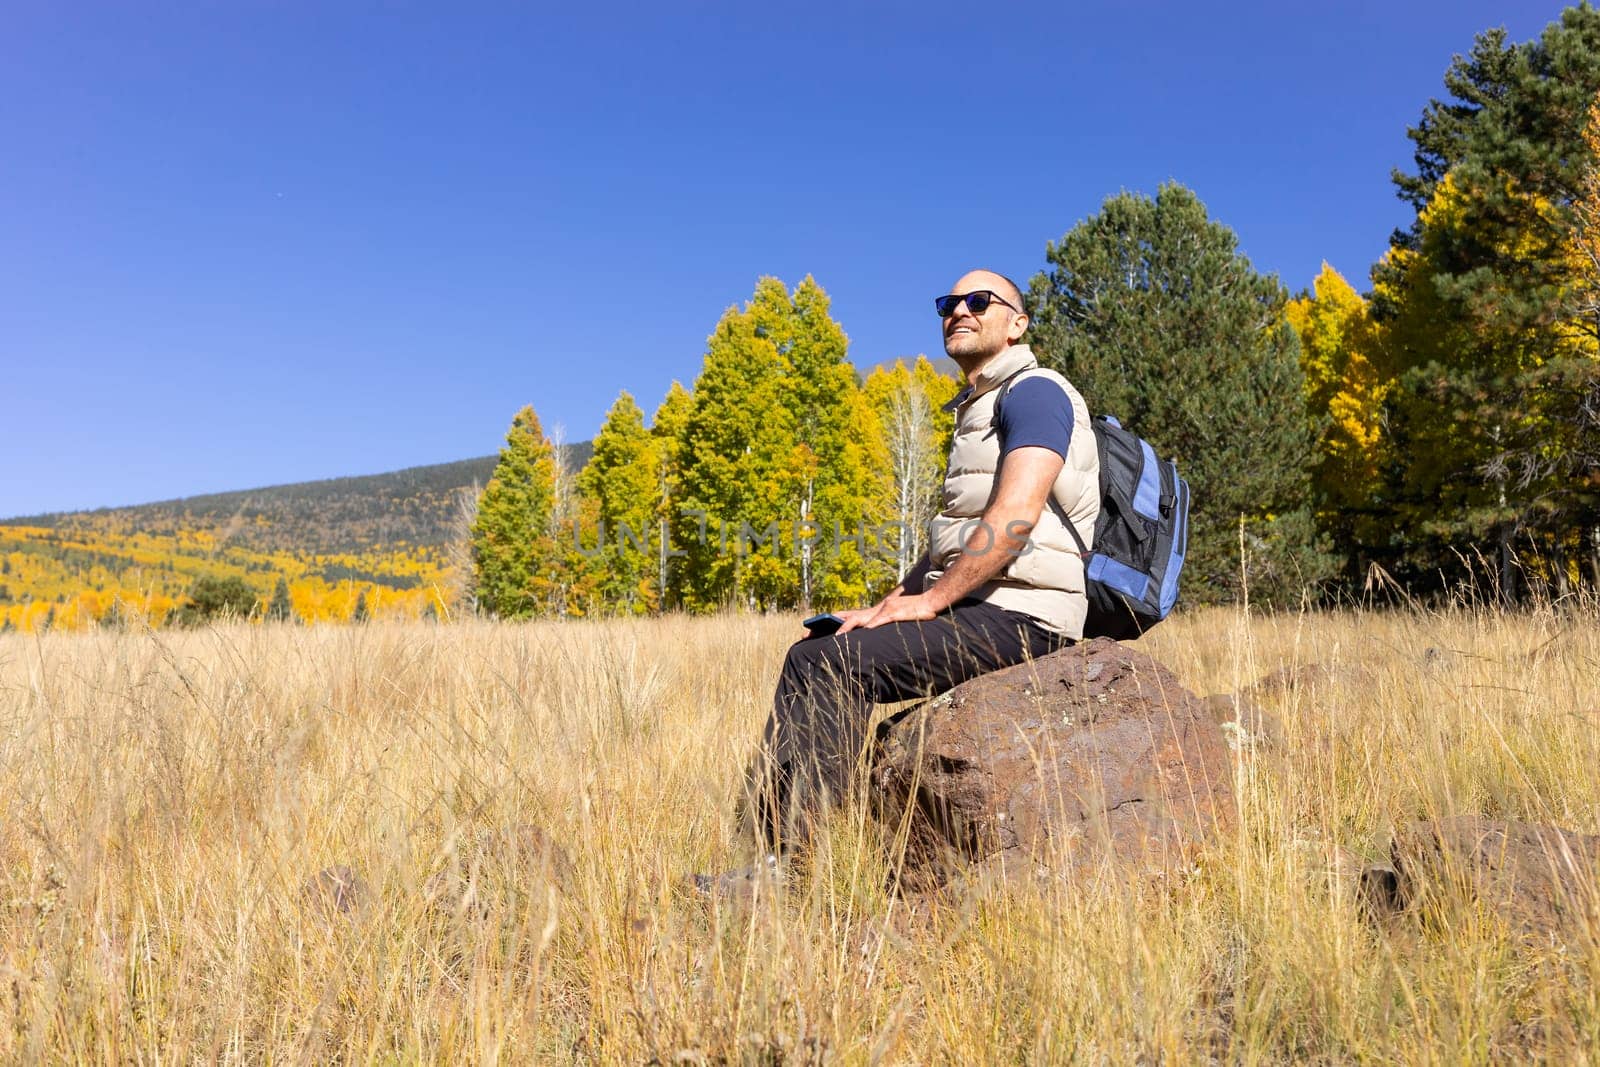 Happy Smiling Man Takes A Rest During Hiking In Mountains At Fall Season On Sunny Day. Male Hiker with Backpack Does Sport , Trekking In Autumn Nature On Vacation. Travel, Active Lifestyle. Copy Space